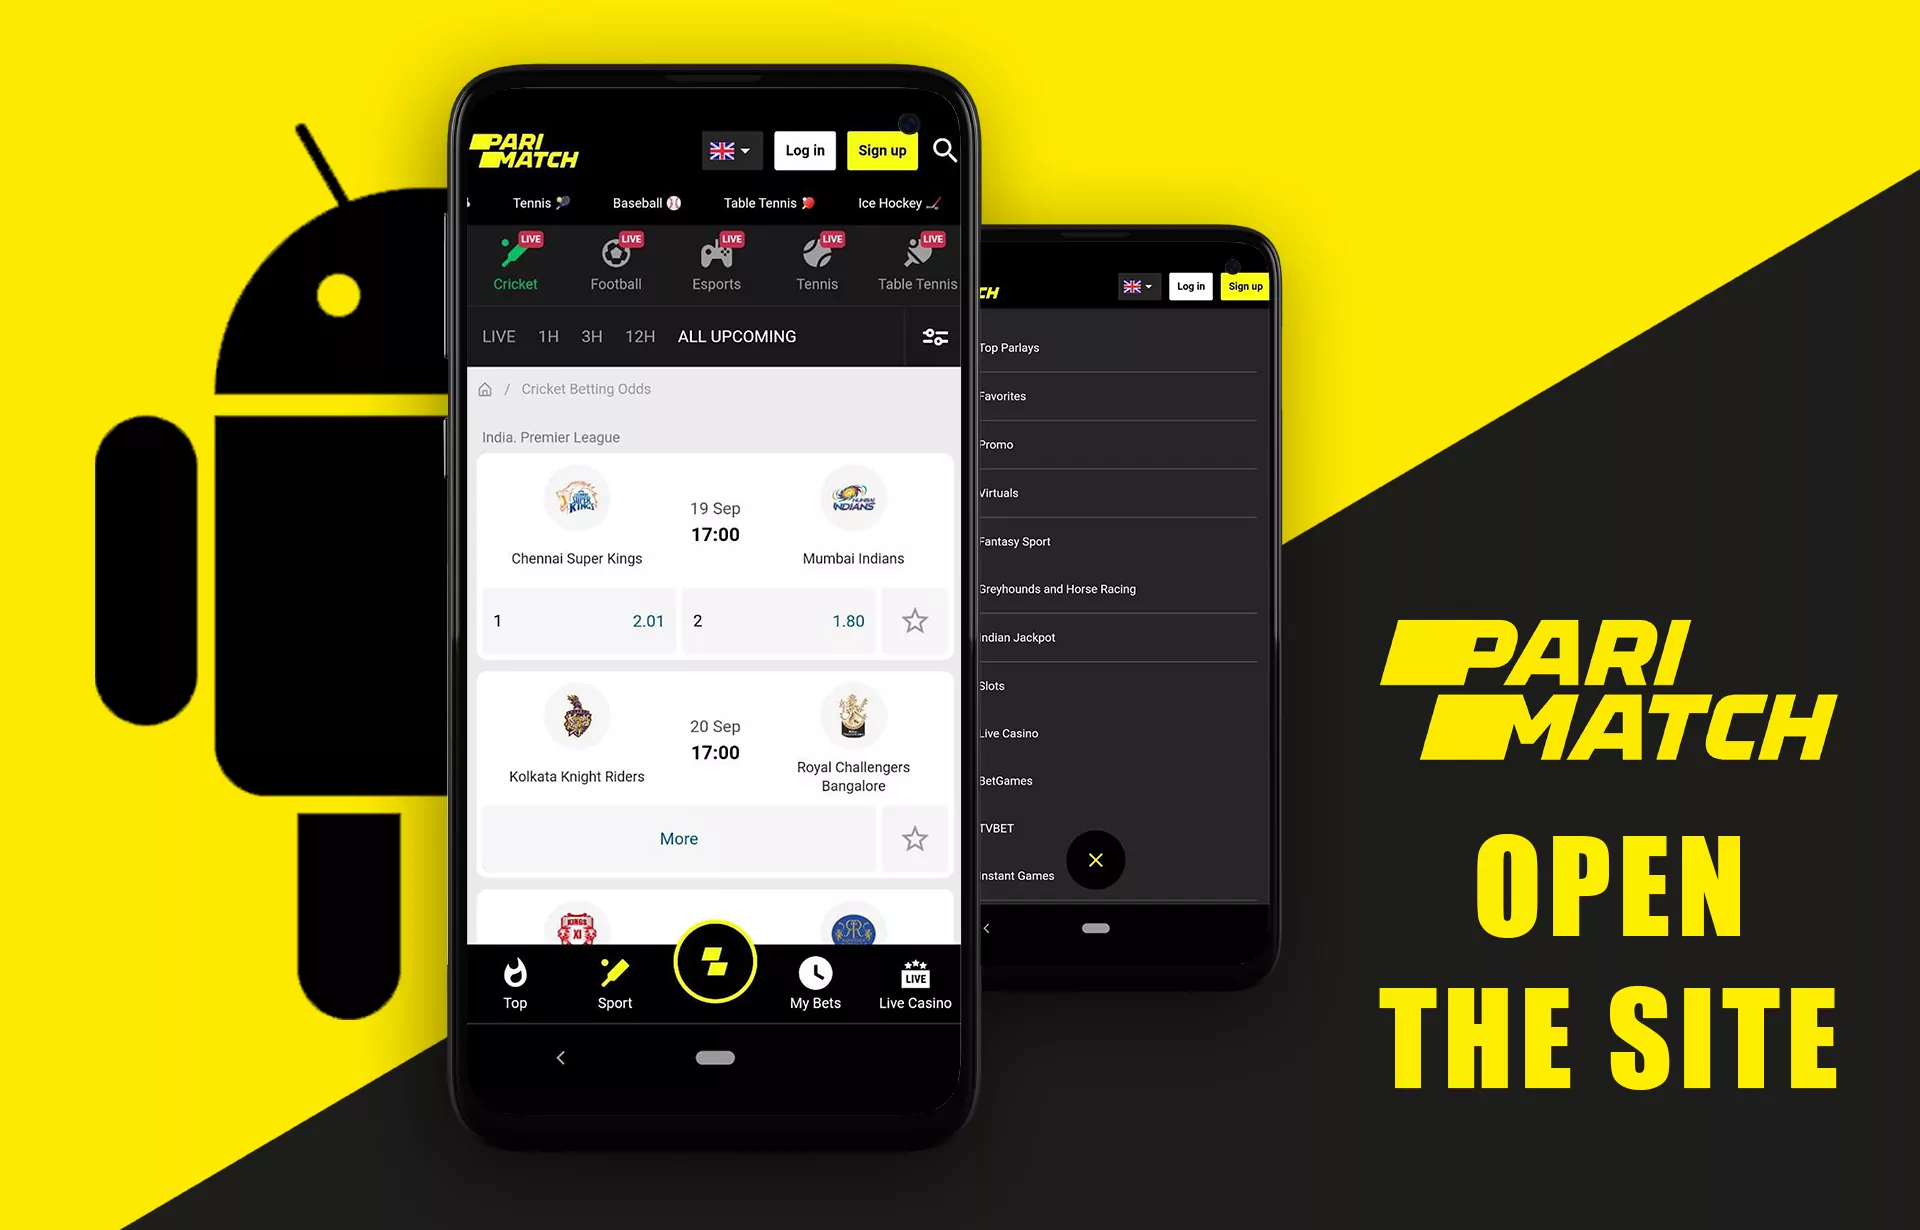 Open the official site of Parimatch in a mobile browser.